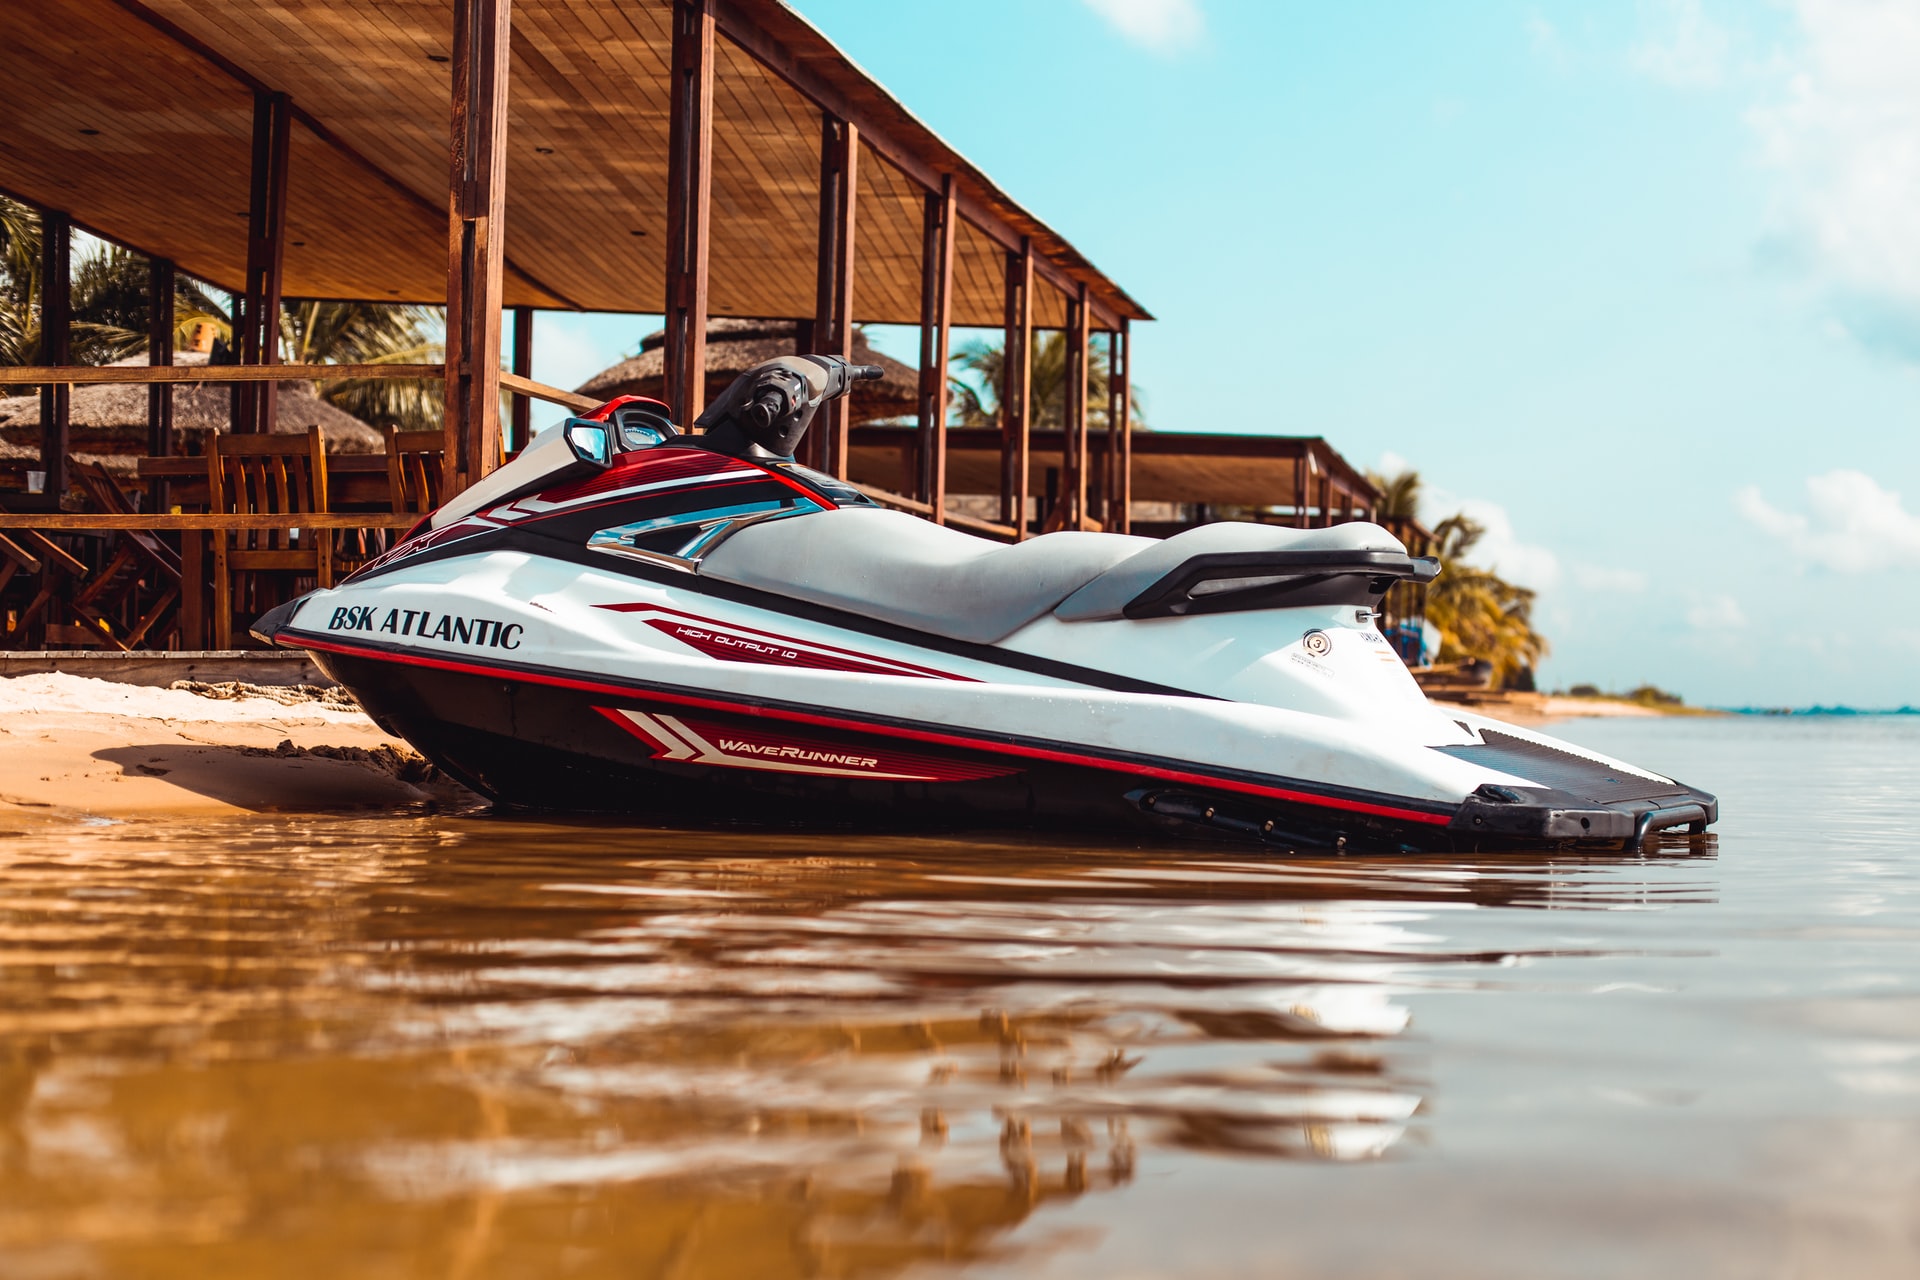 Can You Leave a Jet Ski in the Water?